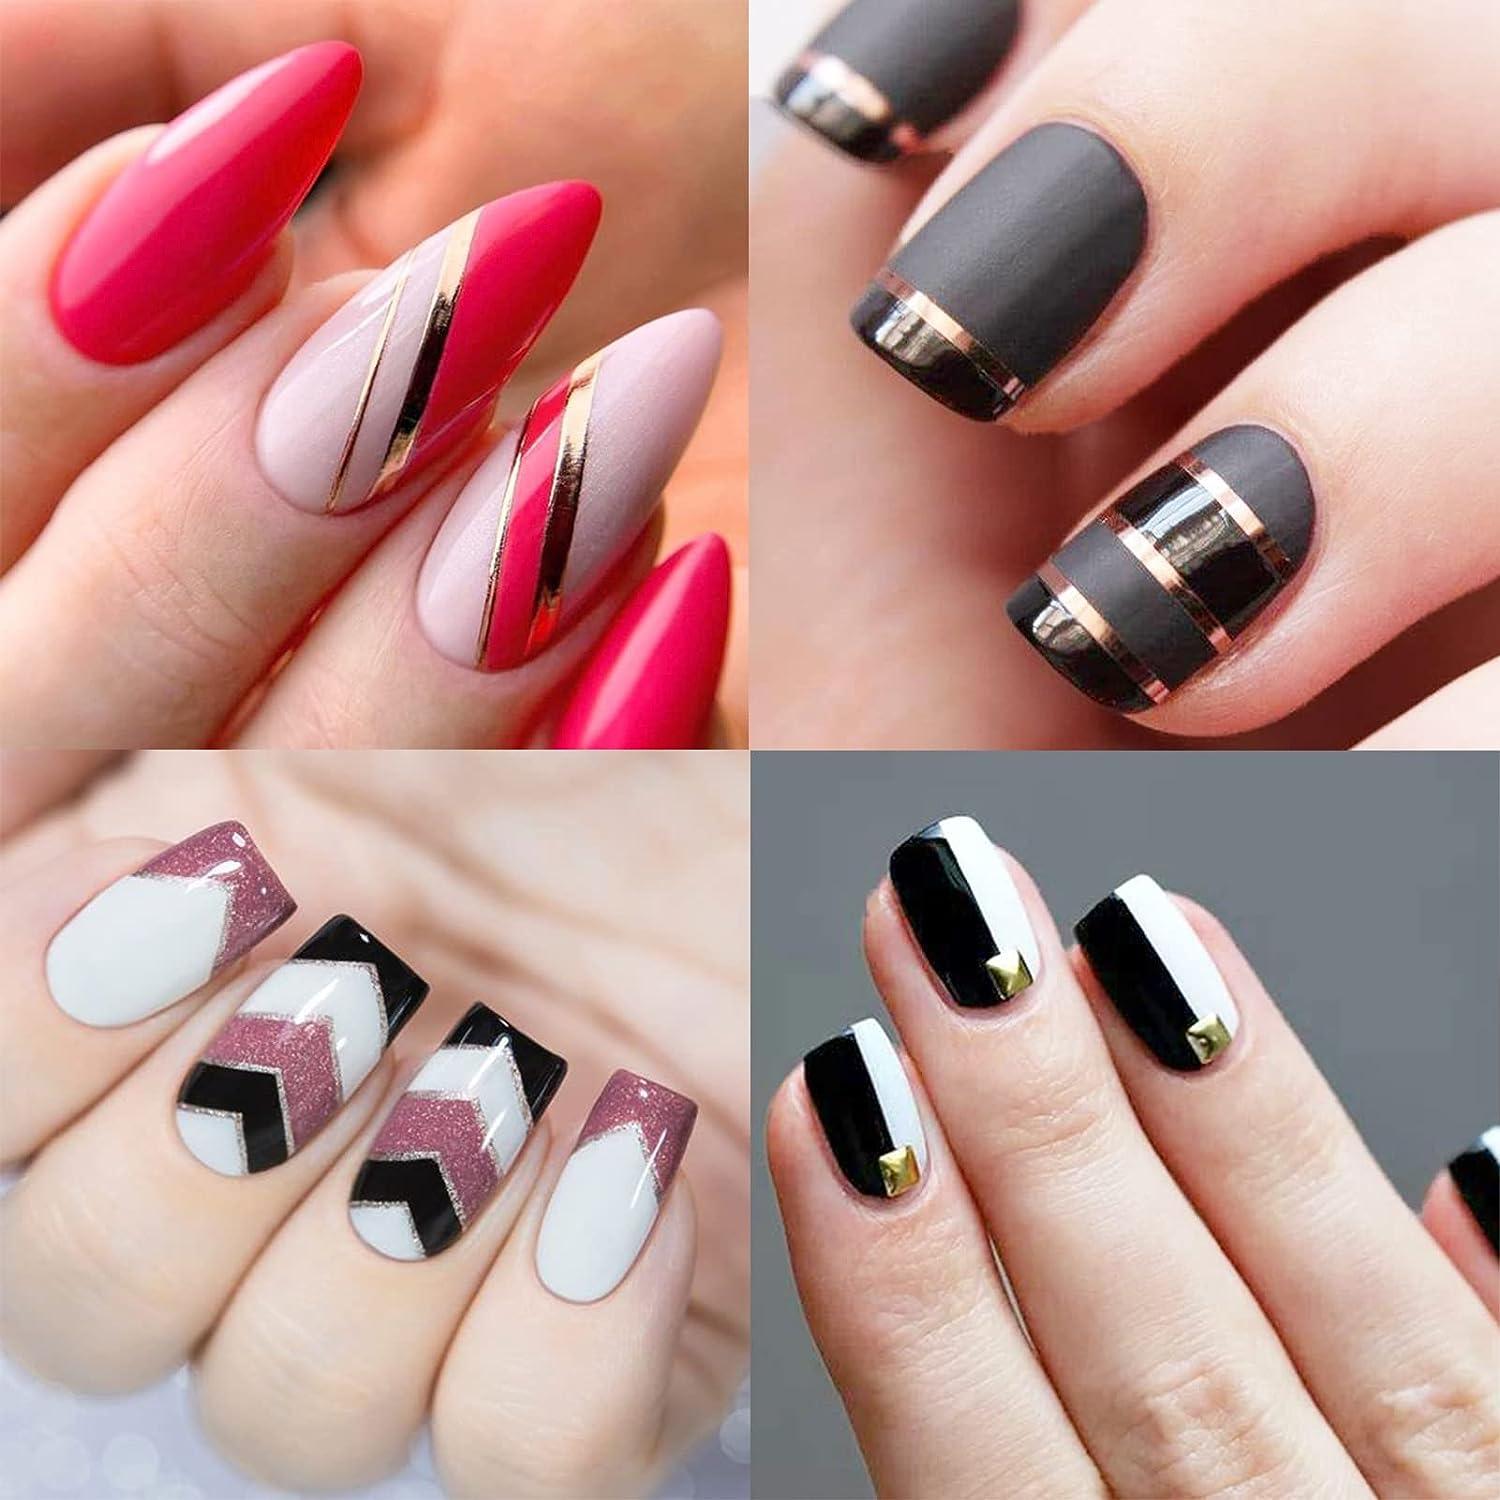 1860 Pieces French Tip Nail Guides, Self-Adhesive French V-Shaped Moon  Shaped Manicure Strip Stickers For Edge Auxiliary Black DIY Decoration  Stencil